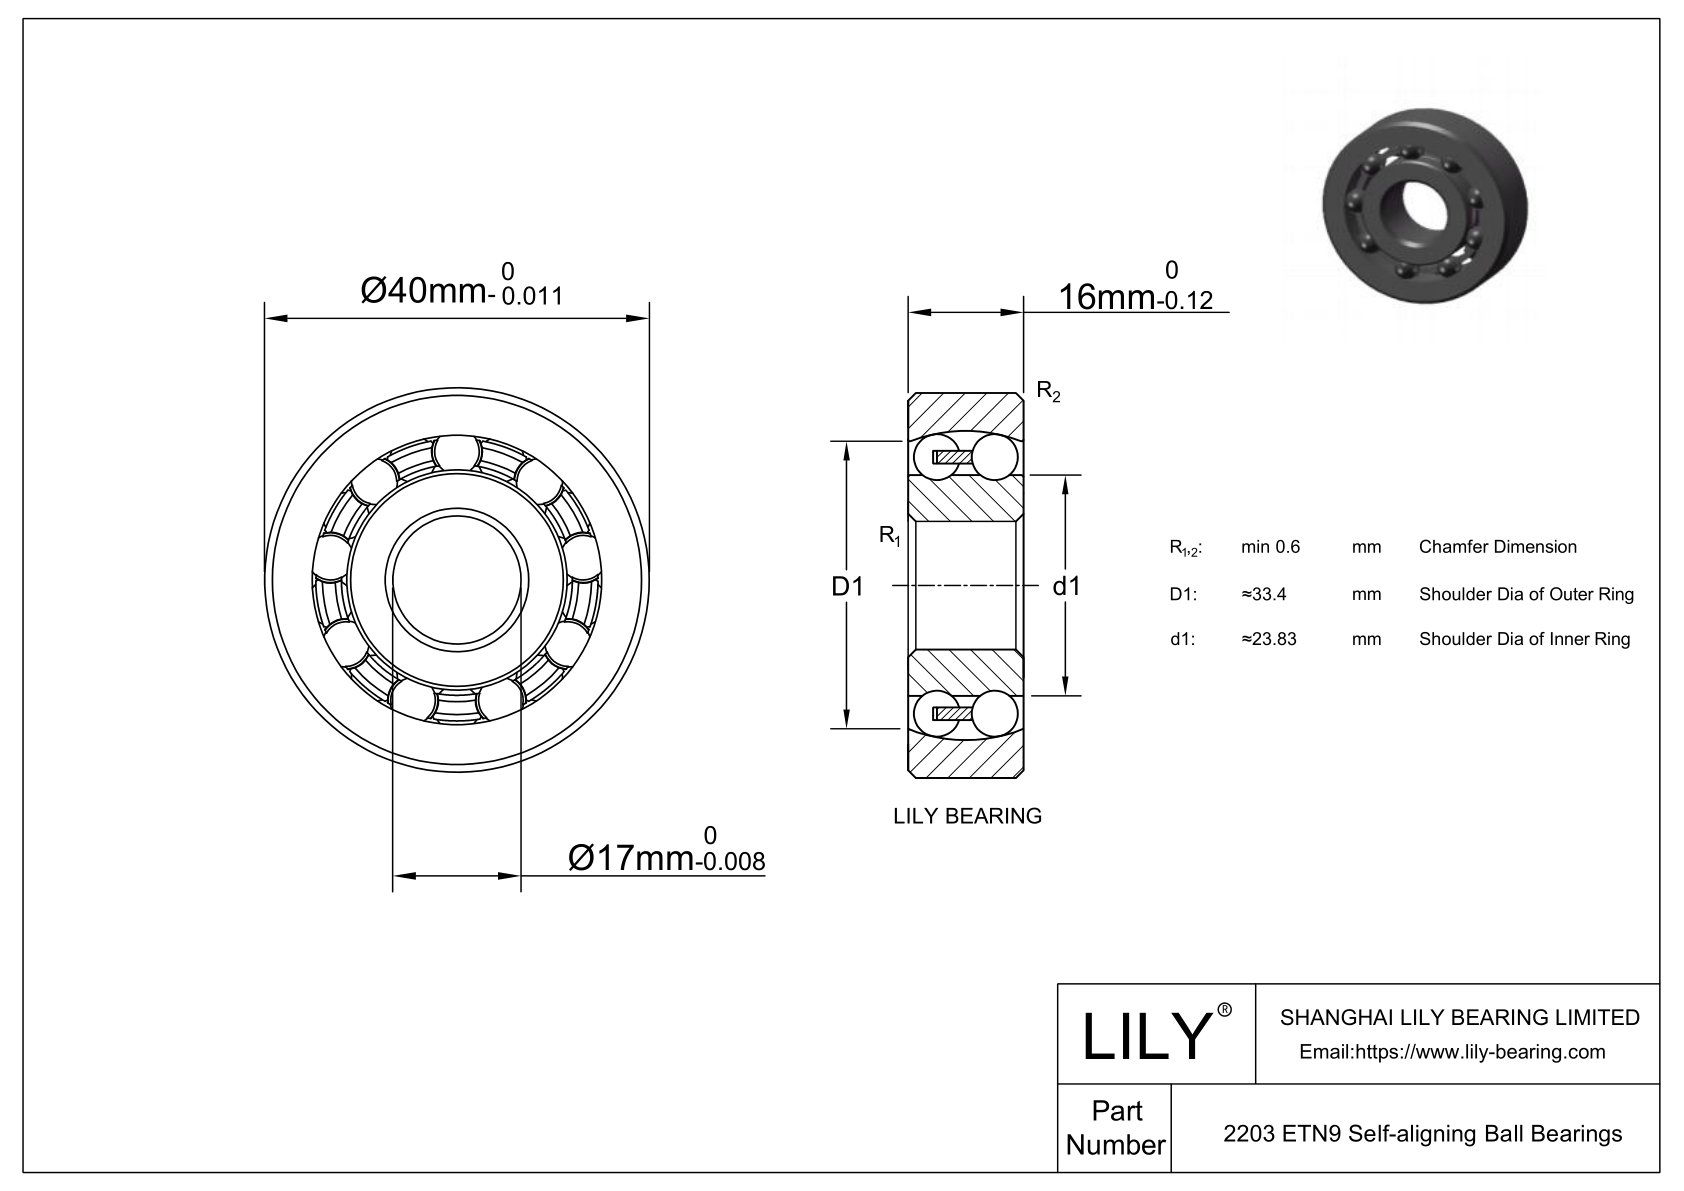 S2203 ETN9 Stainless Steel Self Aligning Ball Bearings cad drawing